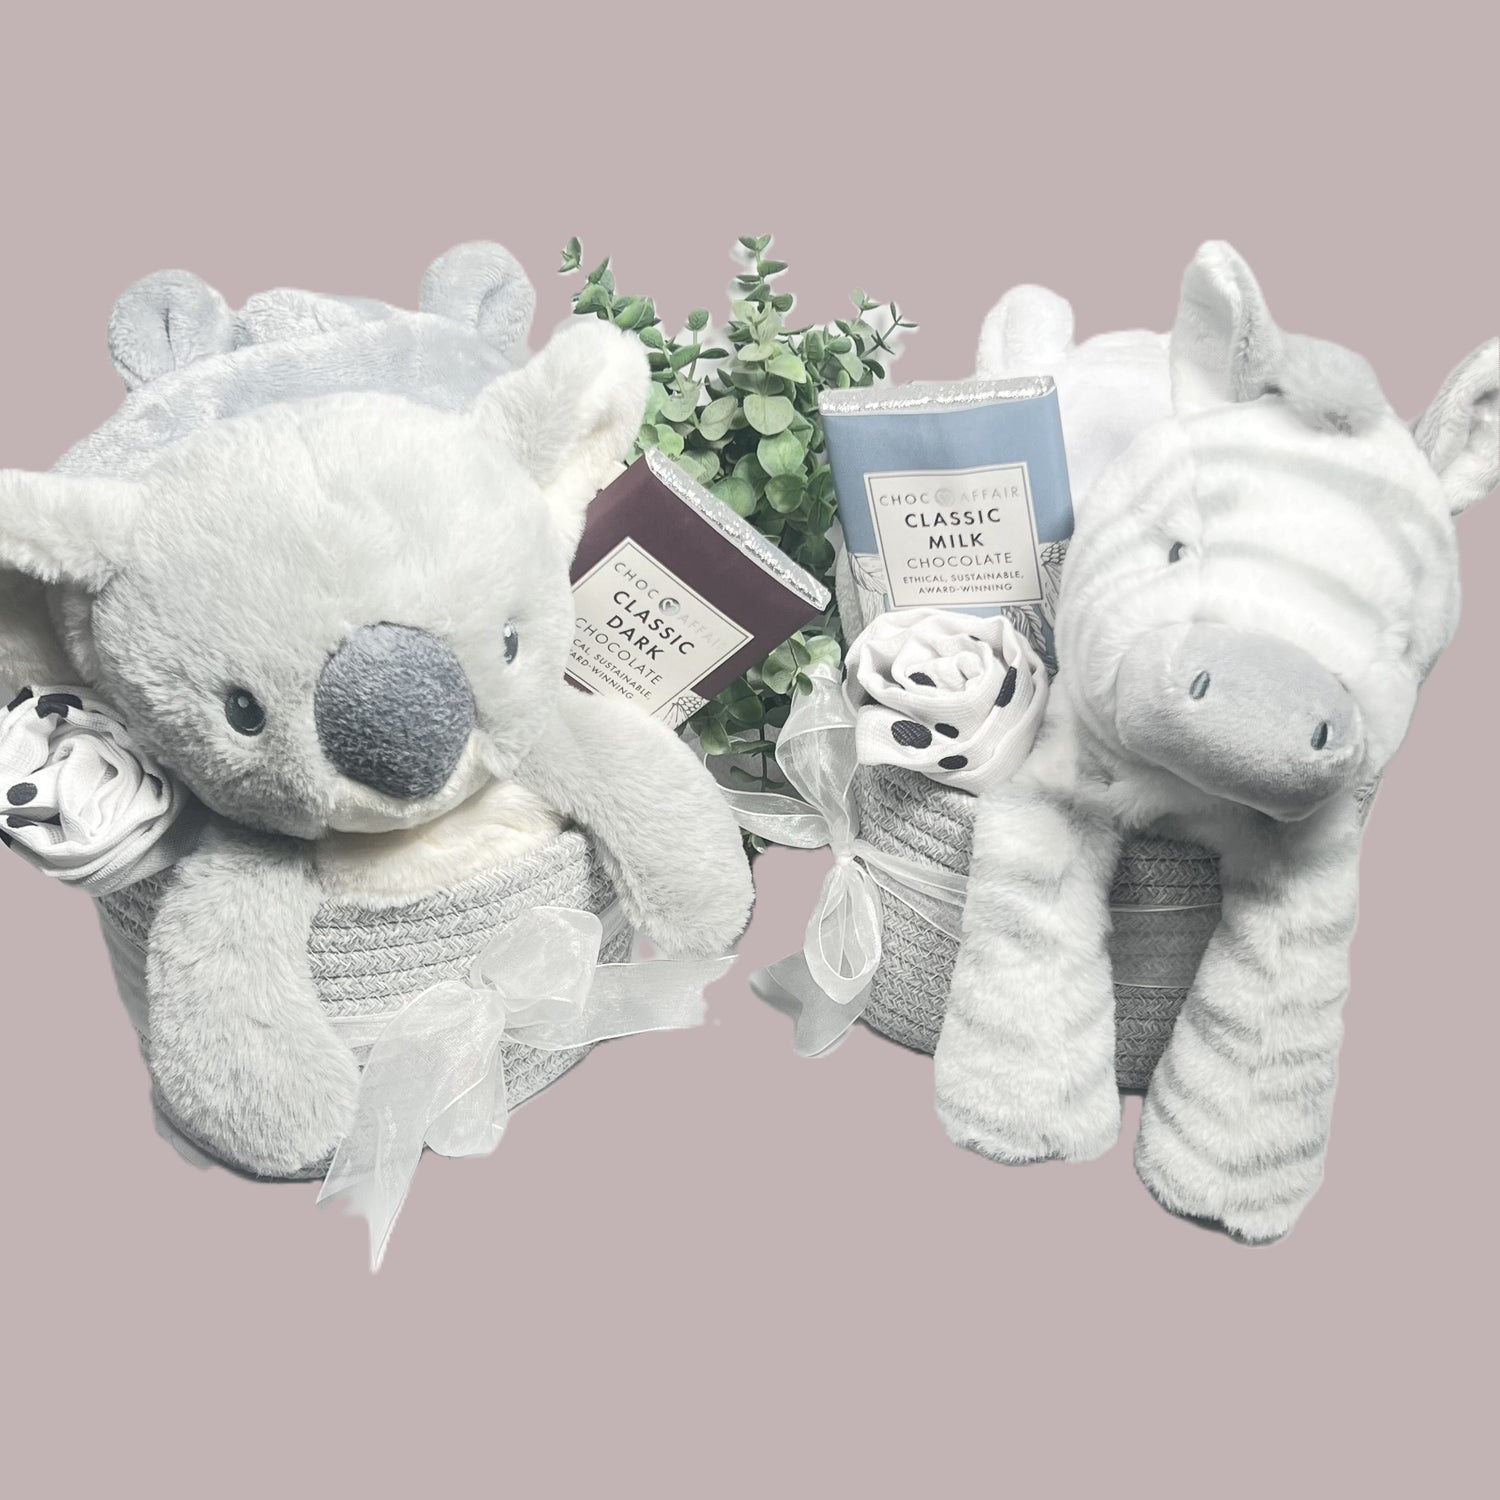 Unisex grey and white new baby hamper gifts in a cotton rope storage caddy in grey tied with a white organza ribbon, a grey and white koala bear or Zebra baby soft toy a bar of chocolate , a grey or white dressing gown and a black and white baby muslin.